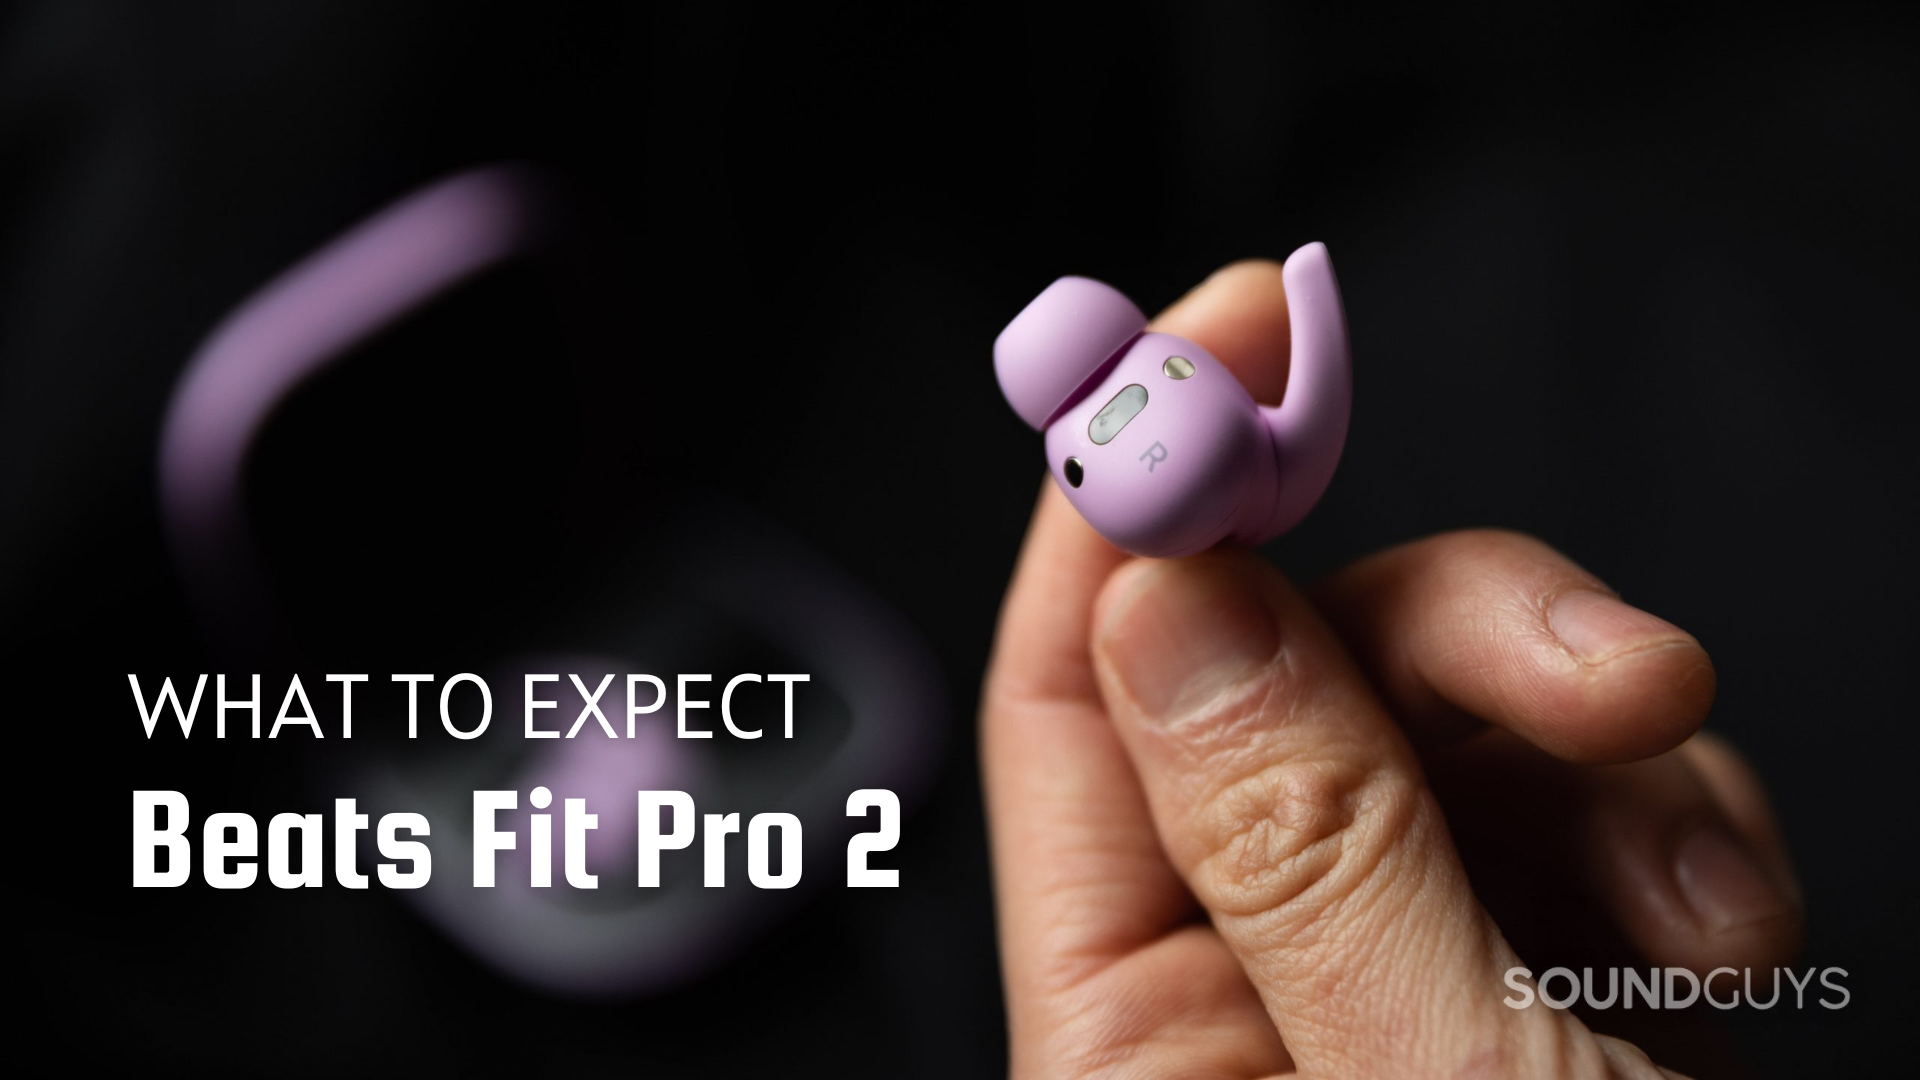 Beats Fit Pro 2 Release date, price, rumors, and features we'd love to see